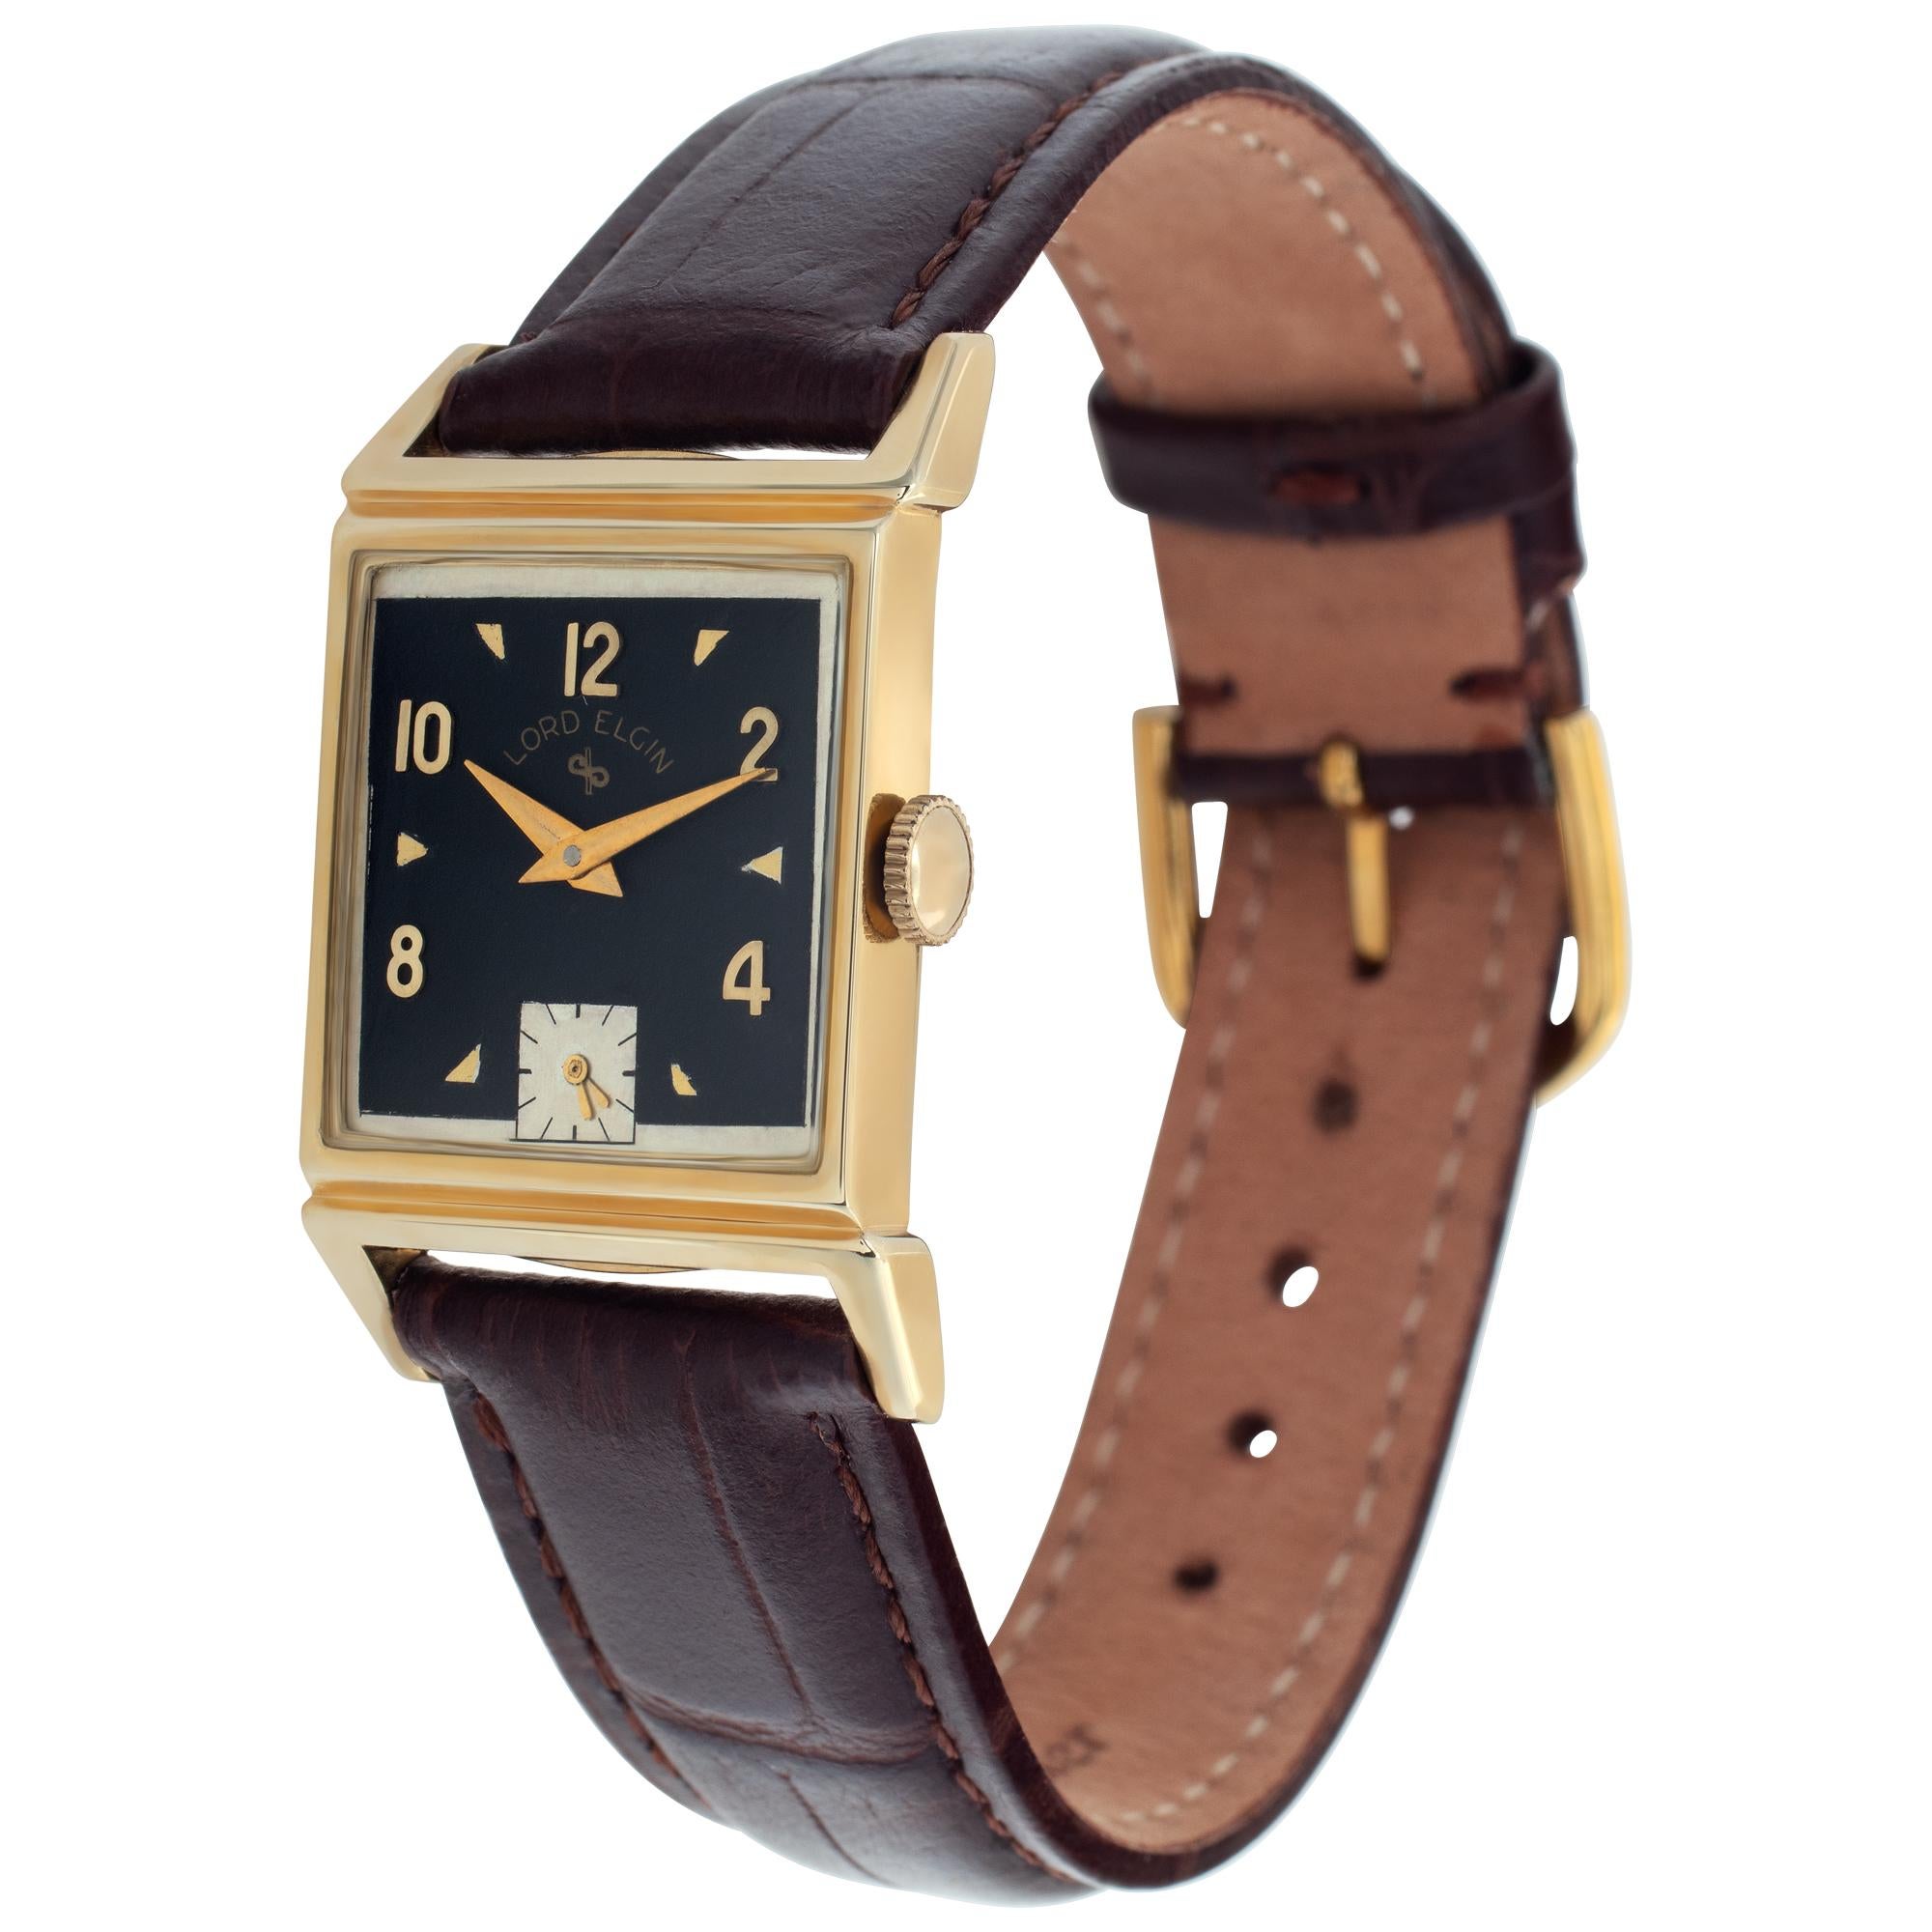 Lord Elgin Classic watch with two-tone black and silver dial in 14k yellow gold on brown leather strap.17 jewels. Manual with sub-seconds. Ref 4531. Circa 1948. Fine Pre-owned Lord Elgin Watch. Certified preowned Vintage Lord Elgin Classic 4531